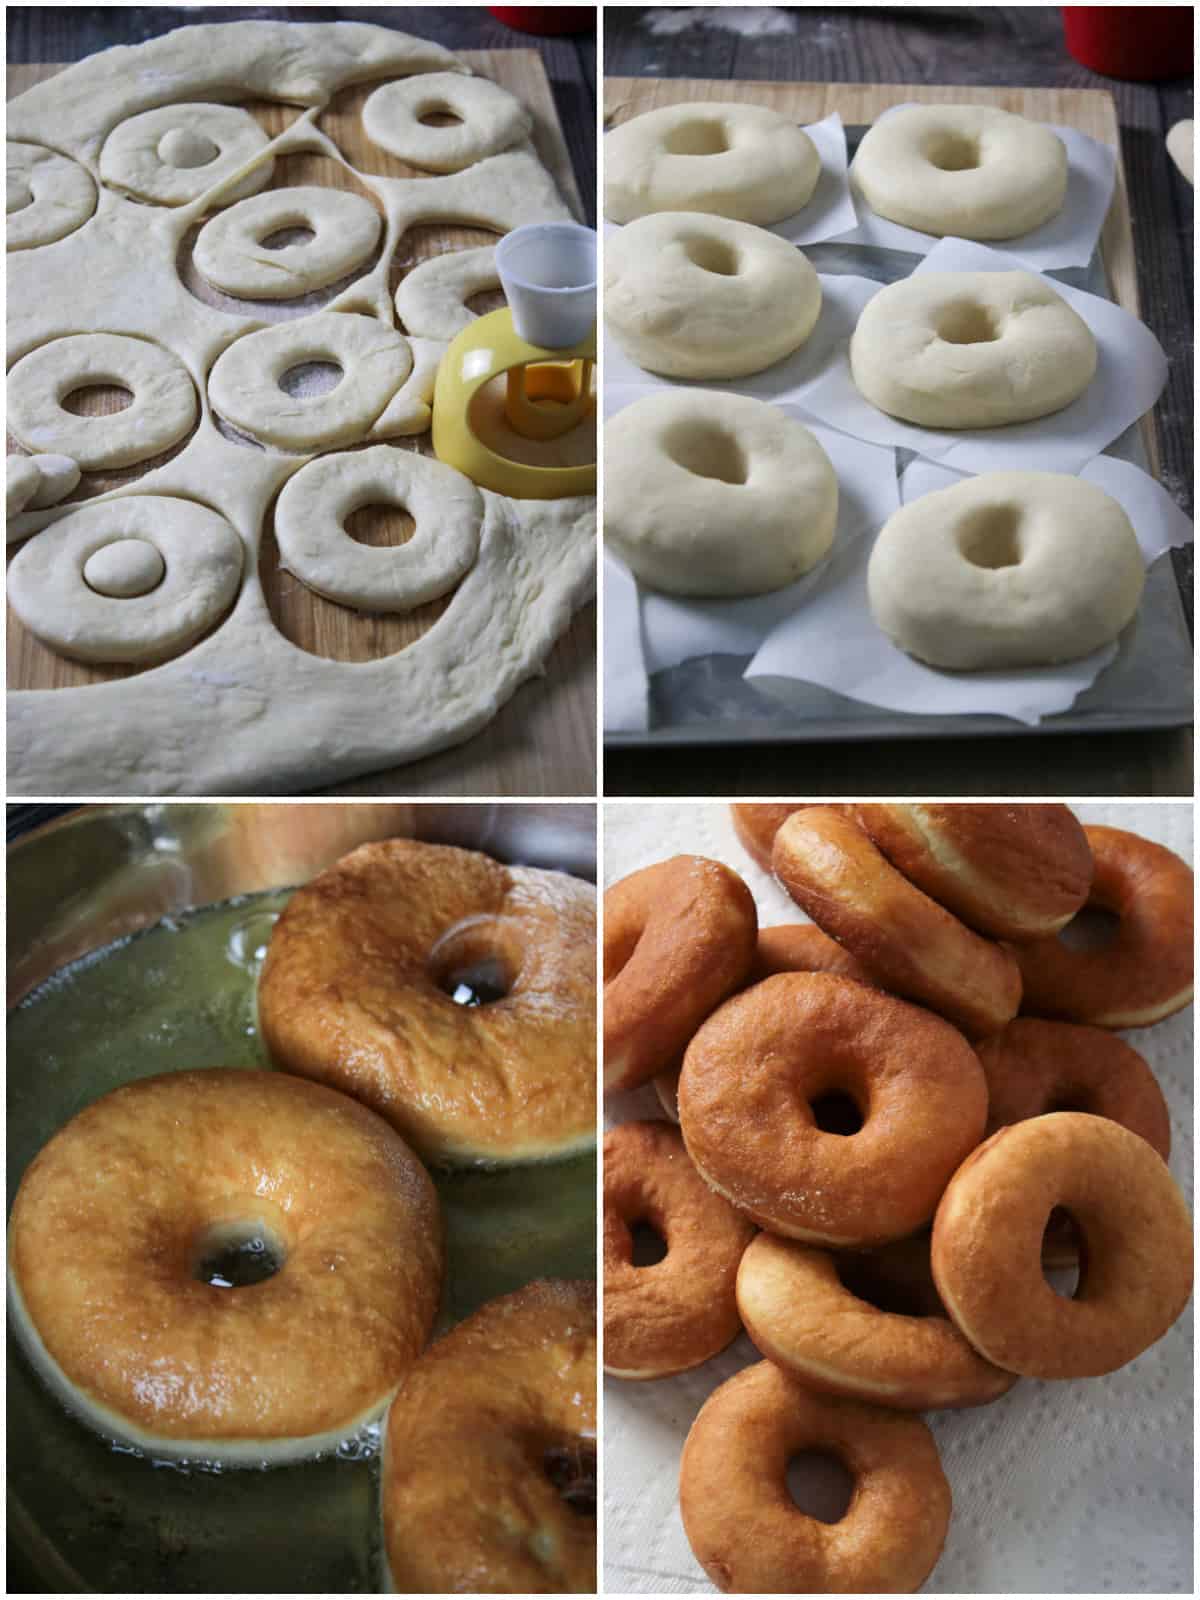 Cutting, frying and draining the yeast donuts.